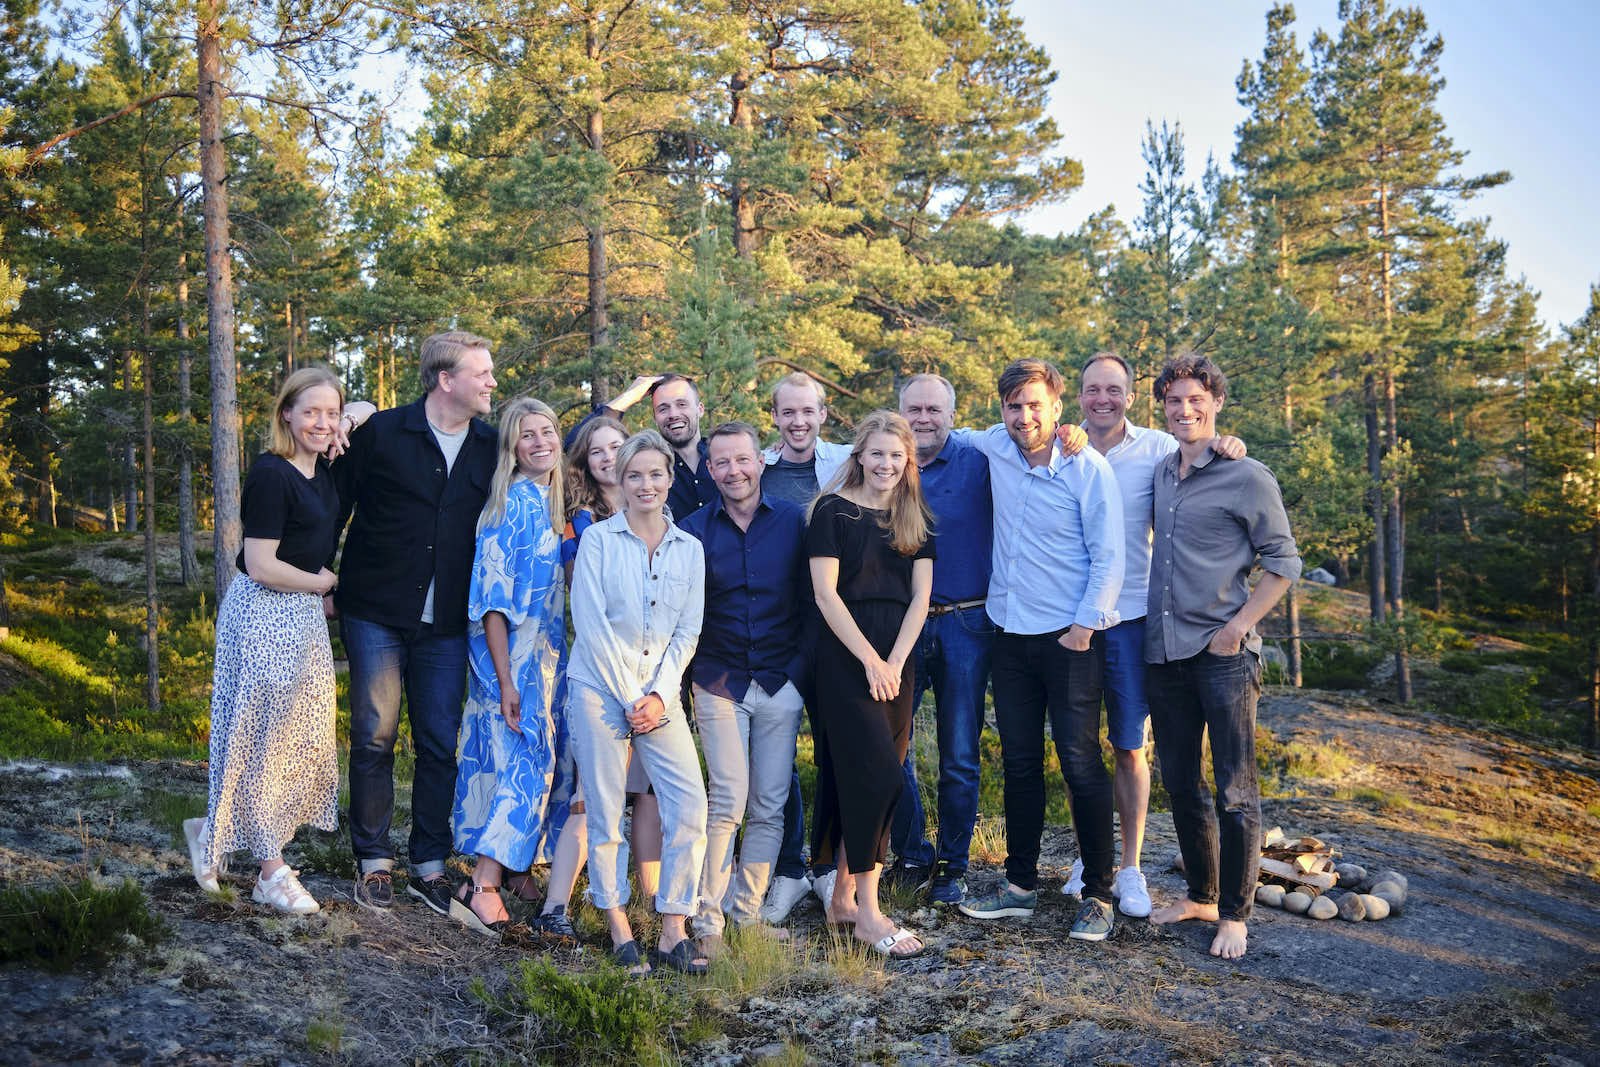 An image of the Inventure team, one of the top early-stage investors in the Nordics